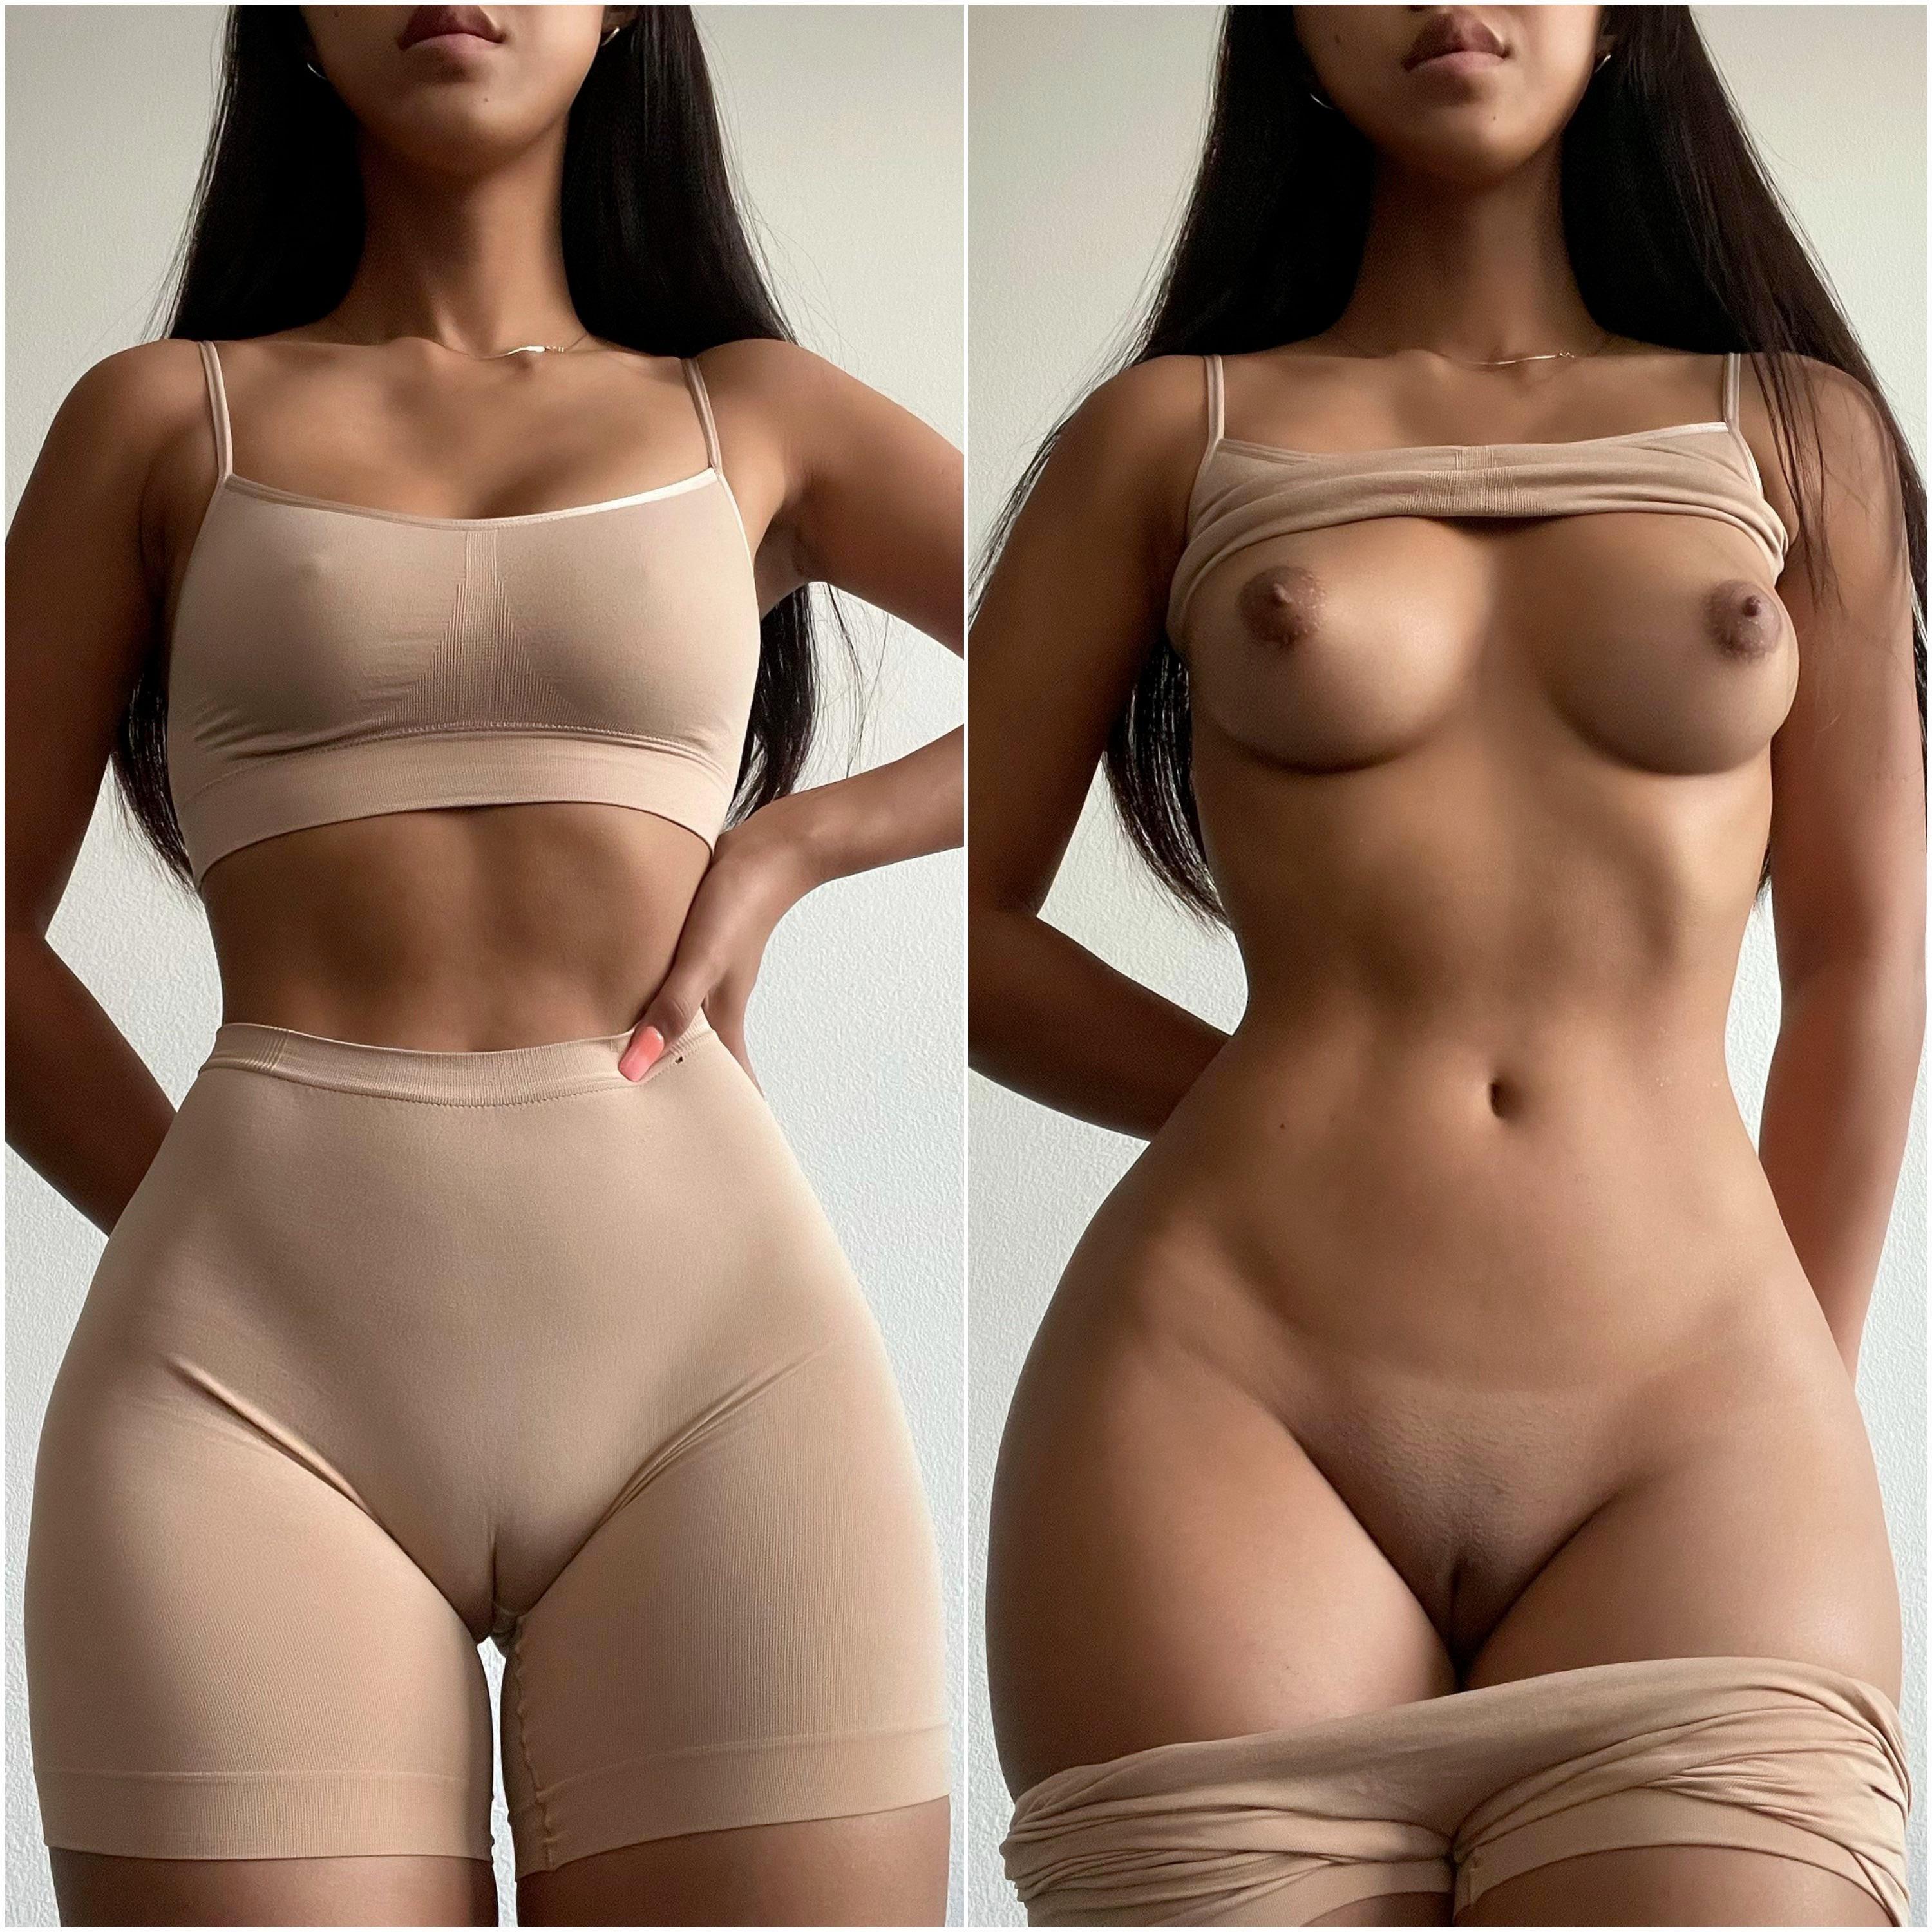 Asian Huge Camel Toe - I can't hide my camel toe when I wear my workout outfit